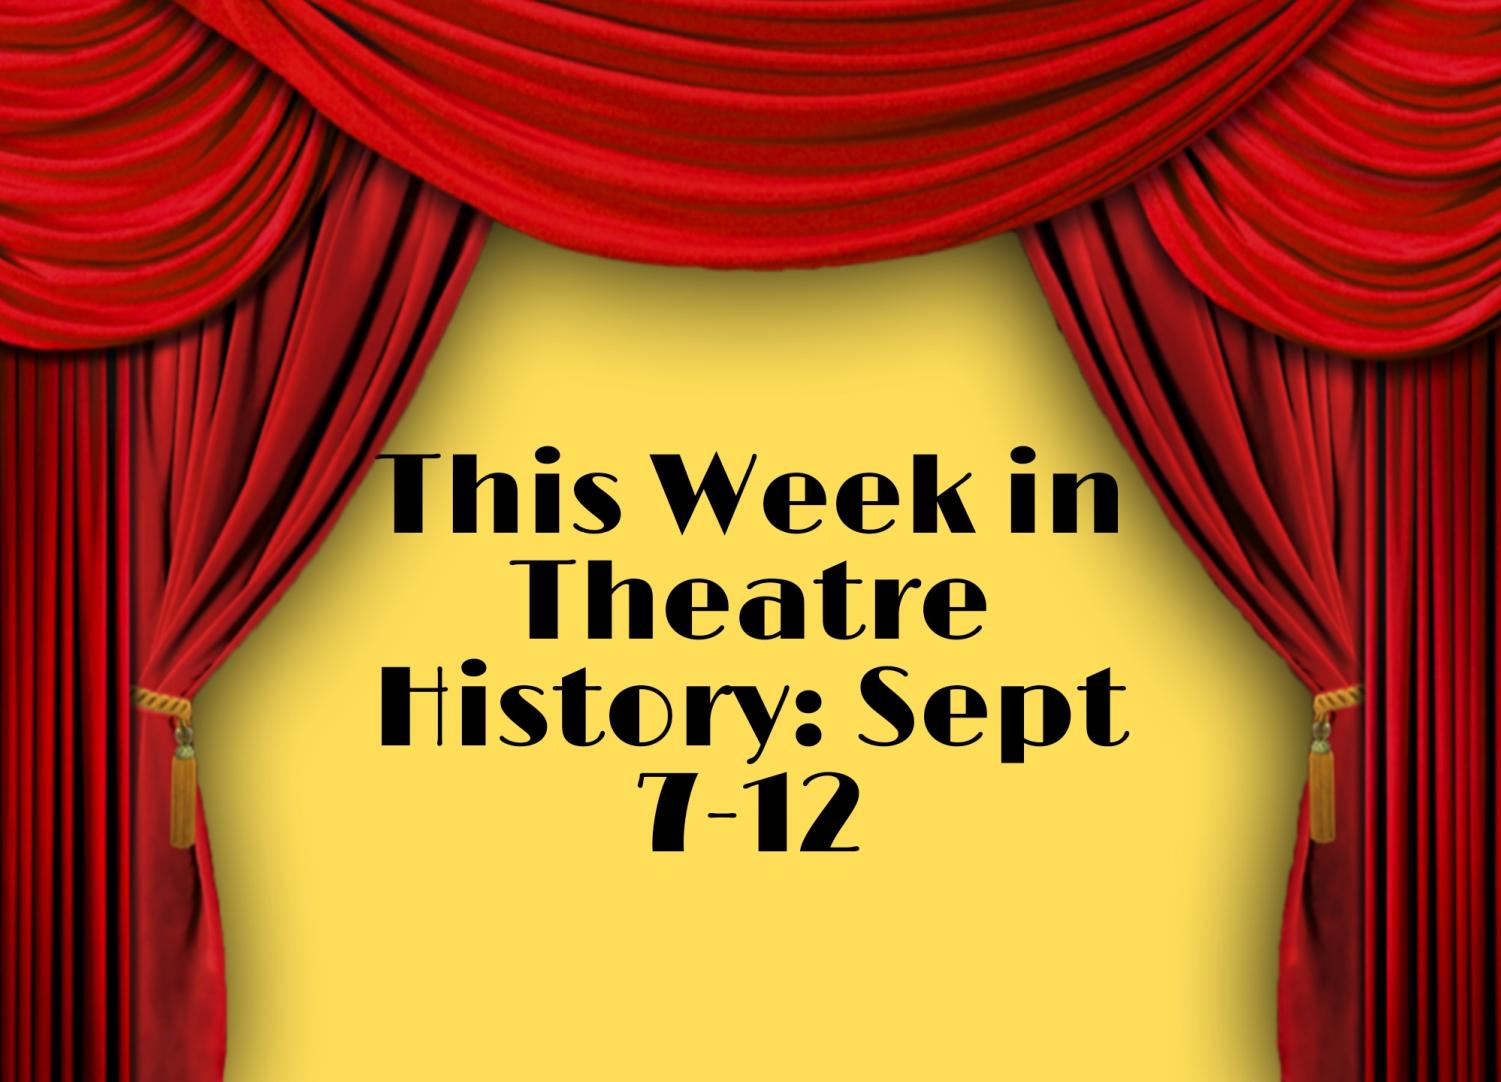 The Nationalist | This Week in Theatre History: Sept. 7-12